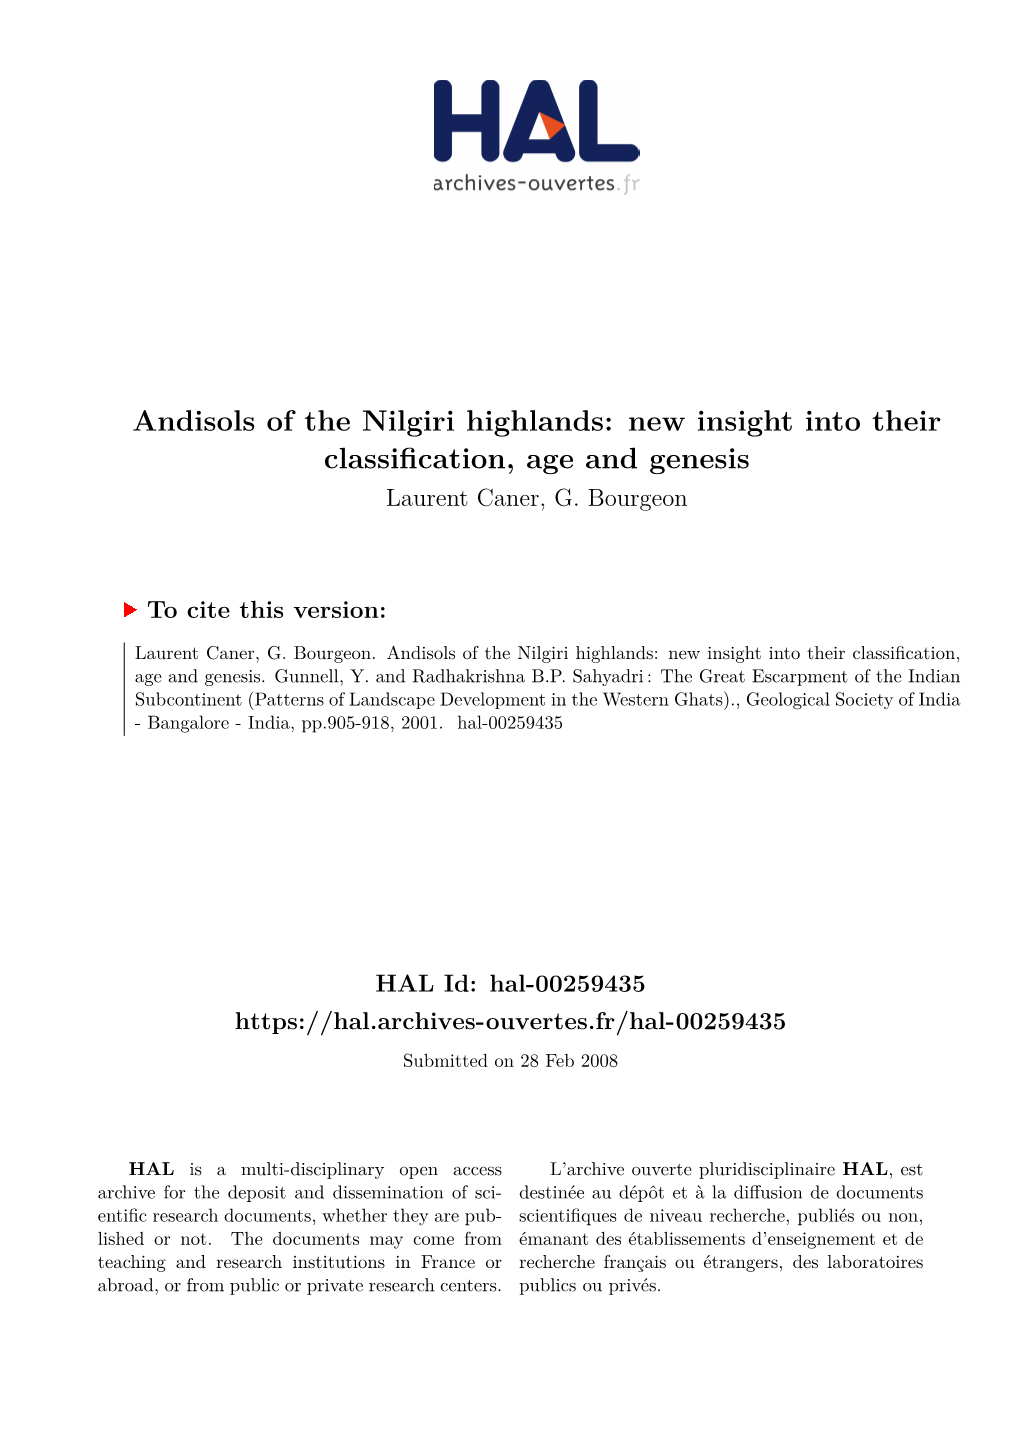 Andisols of the Nilgiri Highlands: New Insight Into Their Classification, Age and Genesis Laurent Caner, G